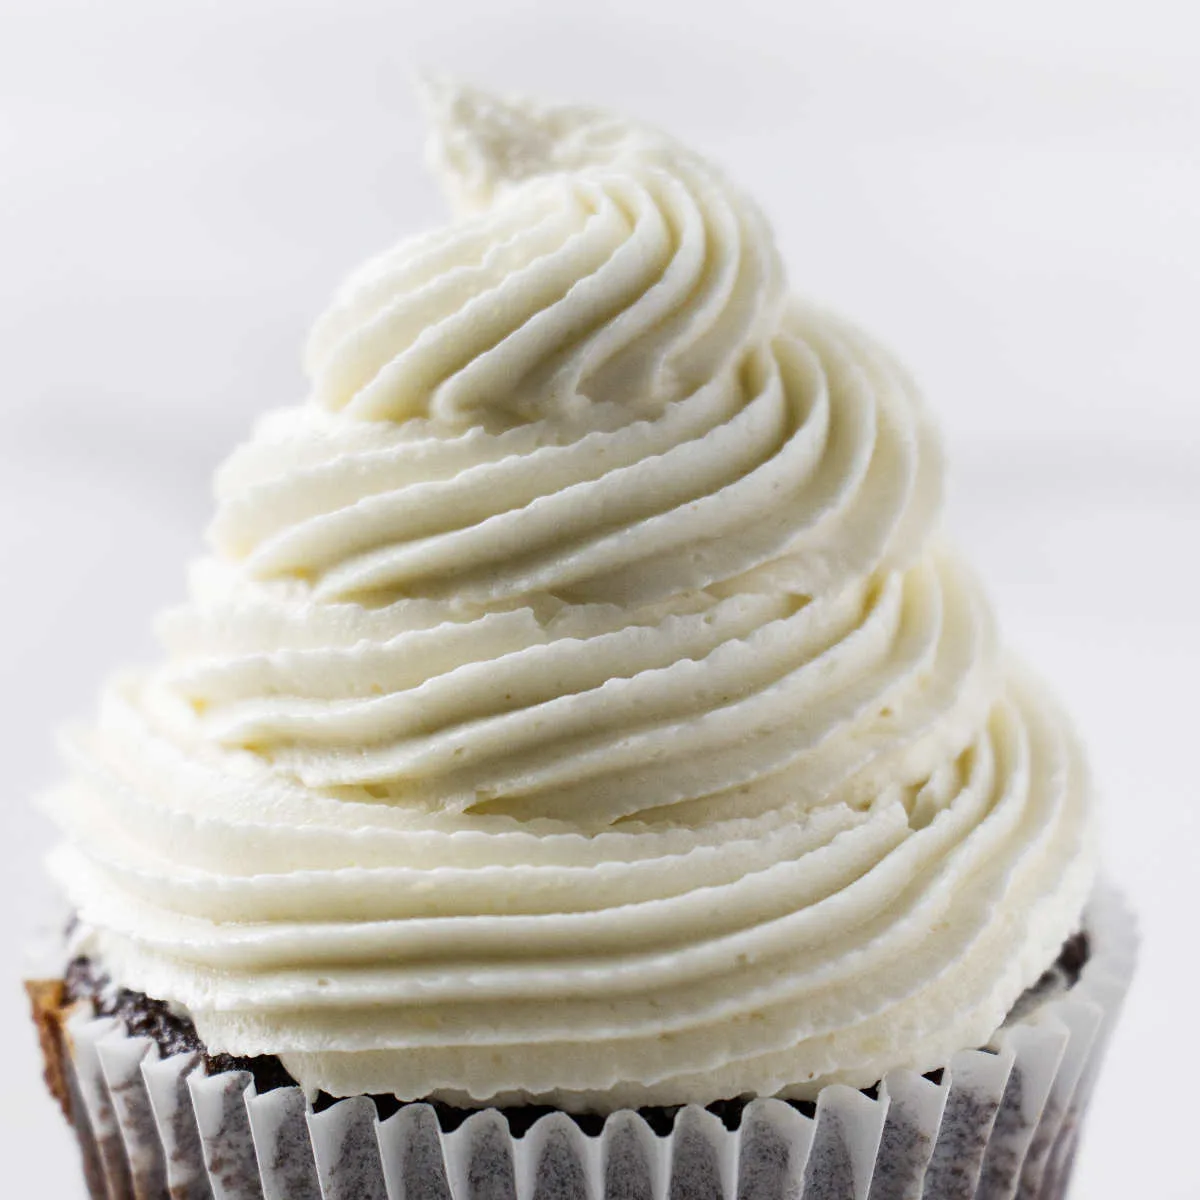 A swirl of coconut buttercream ermine frosting on a cupcakes.